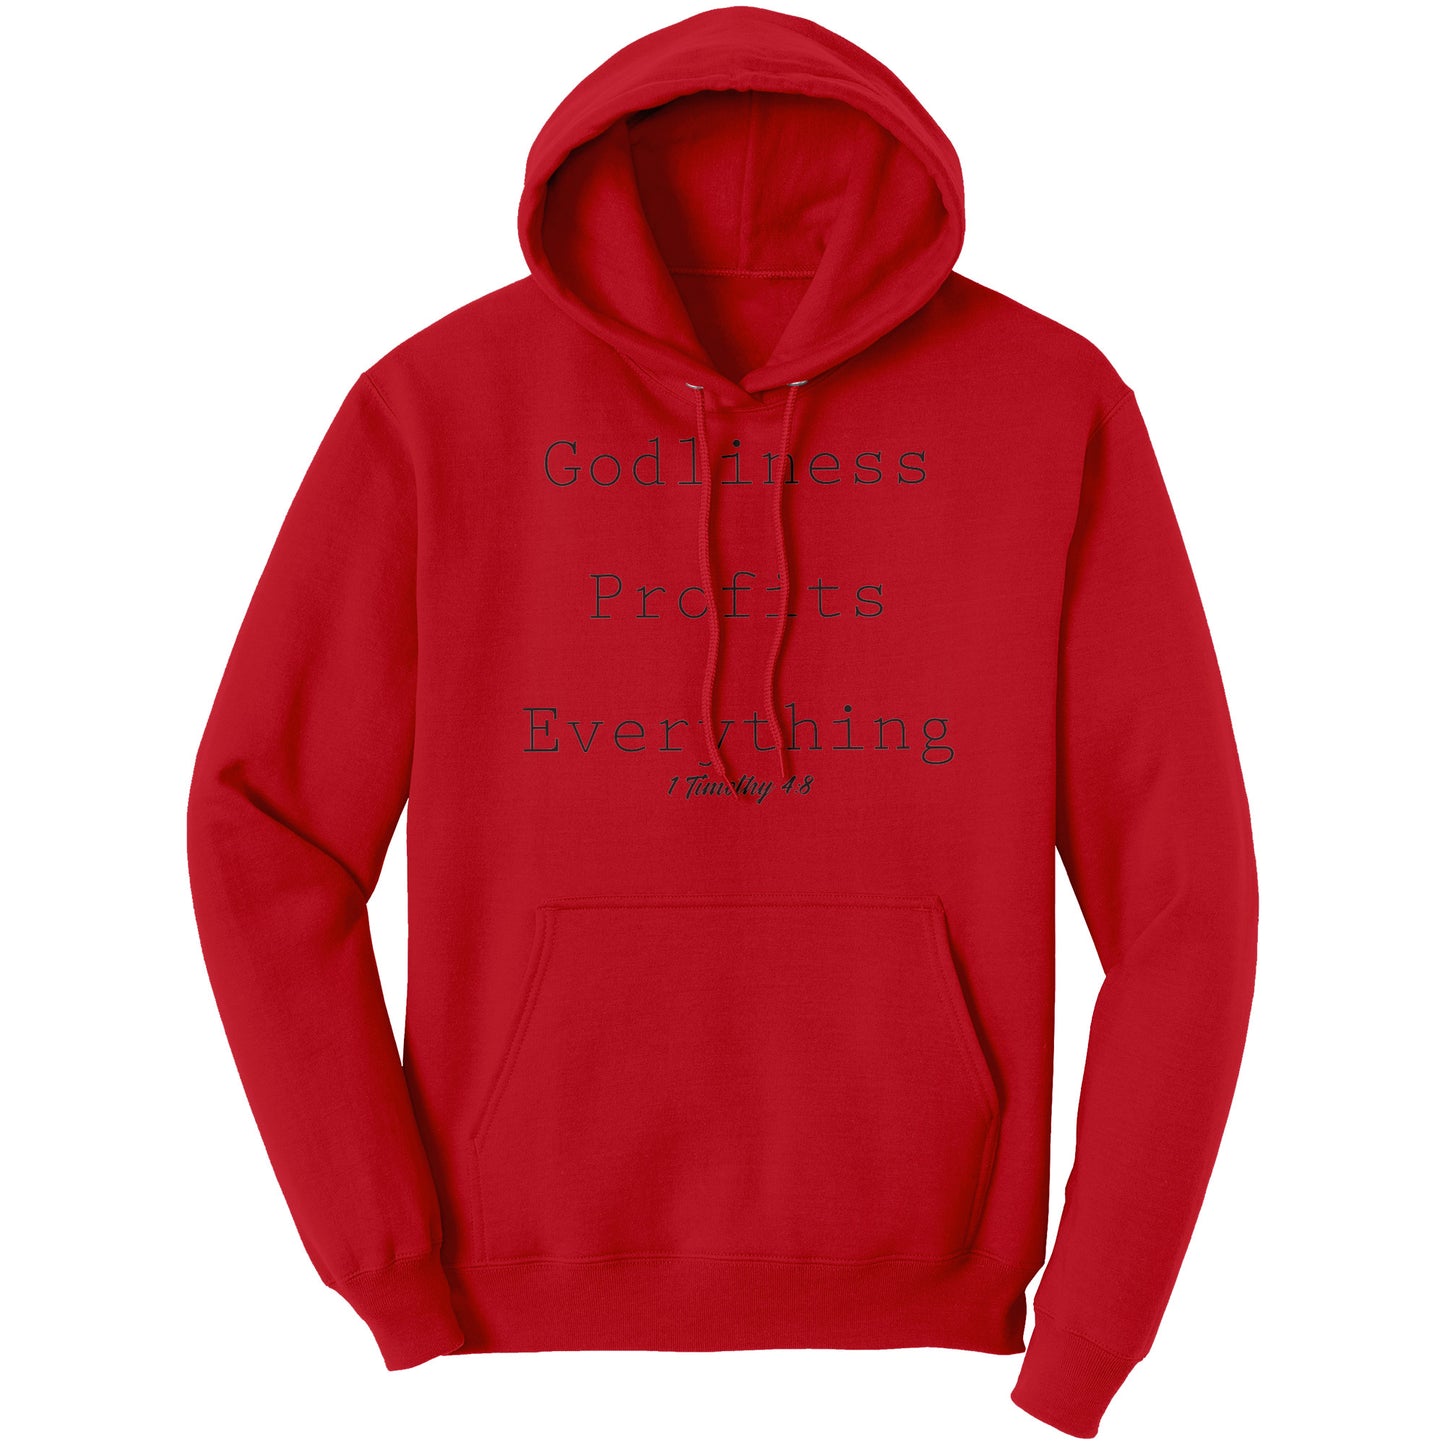 Godliness Profits Everything 1 Timothy 4:8 Hoodie Part 1